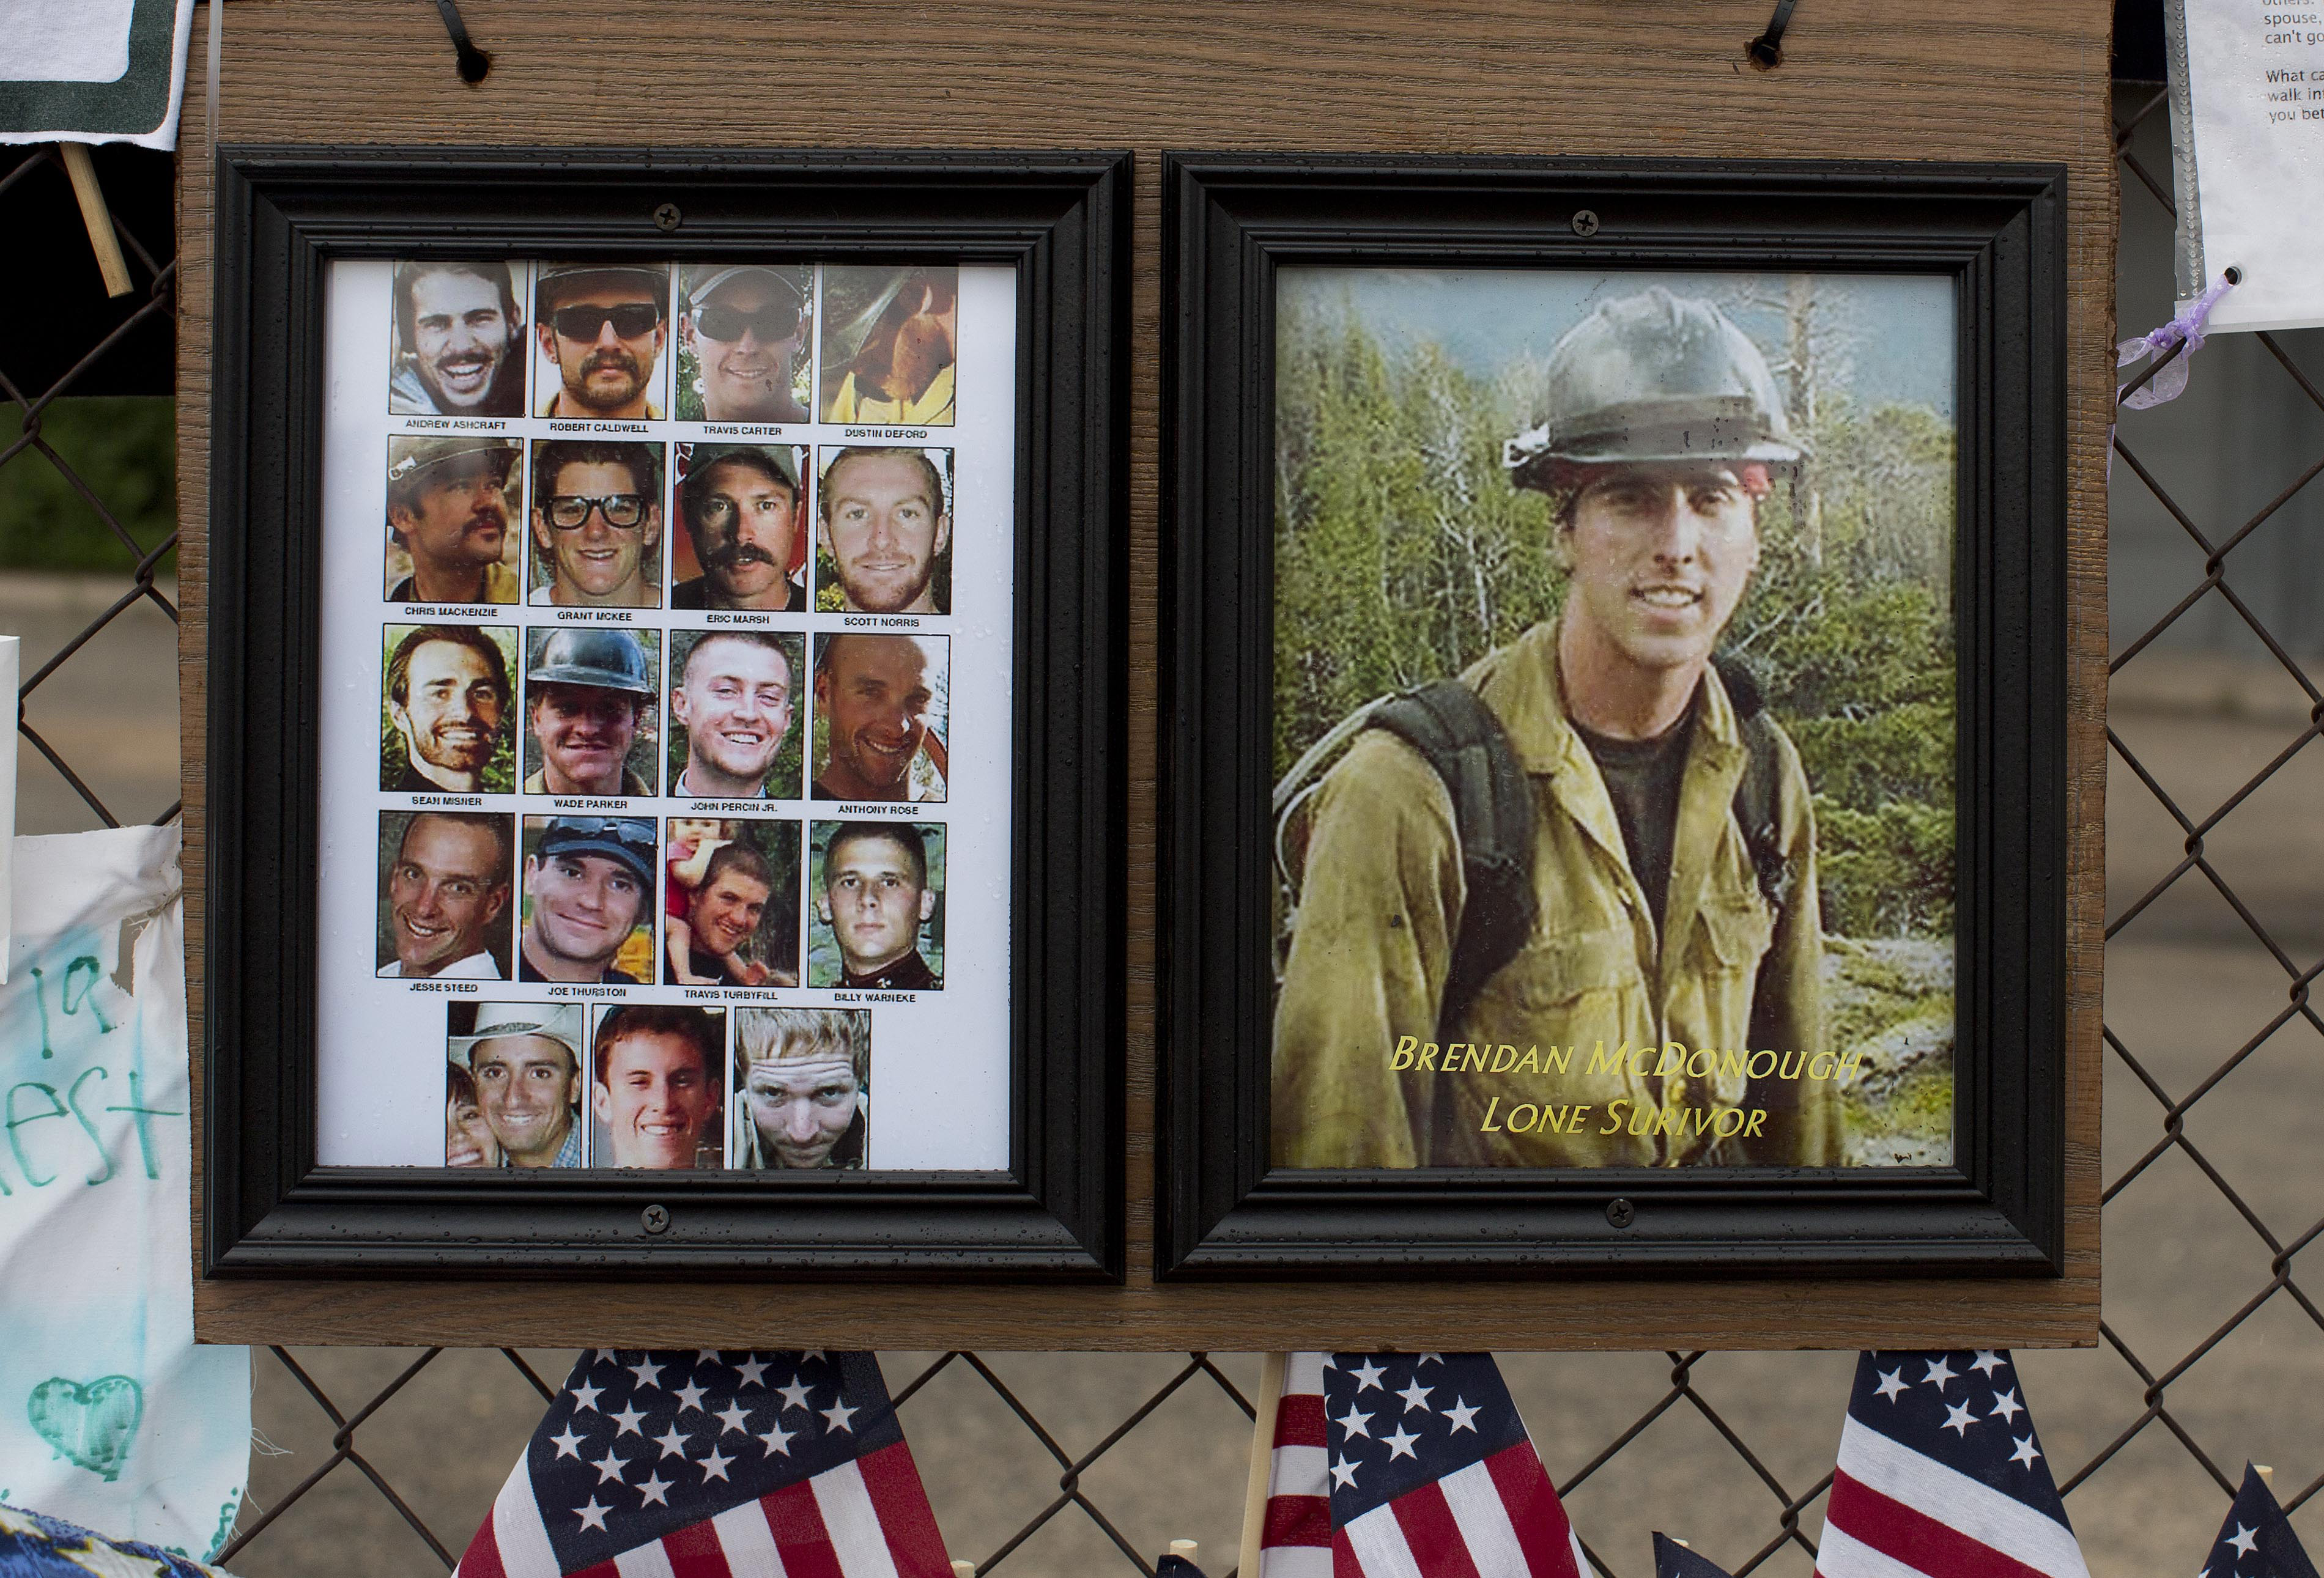 Photos of the 19 fallen Granite Mountain Hotshot firefighters and the lone survivor of the fatal blaze hang on the fence outside Fire Station No. 7, Friday, July 5, 2013 in Prescott, Ariz.